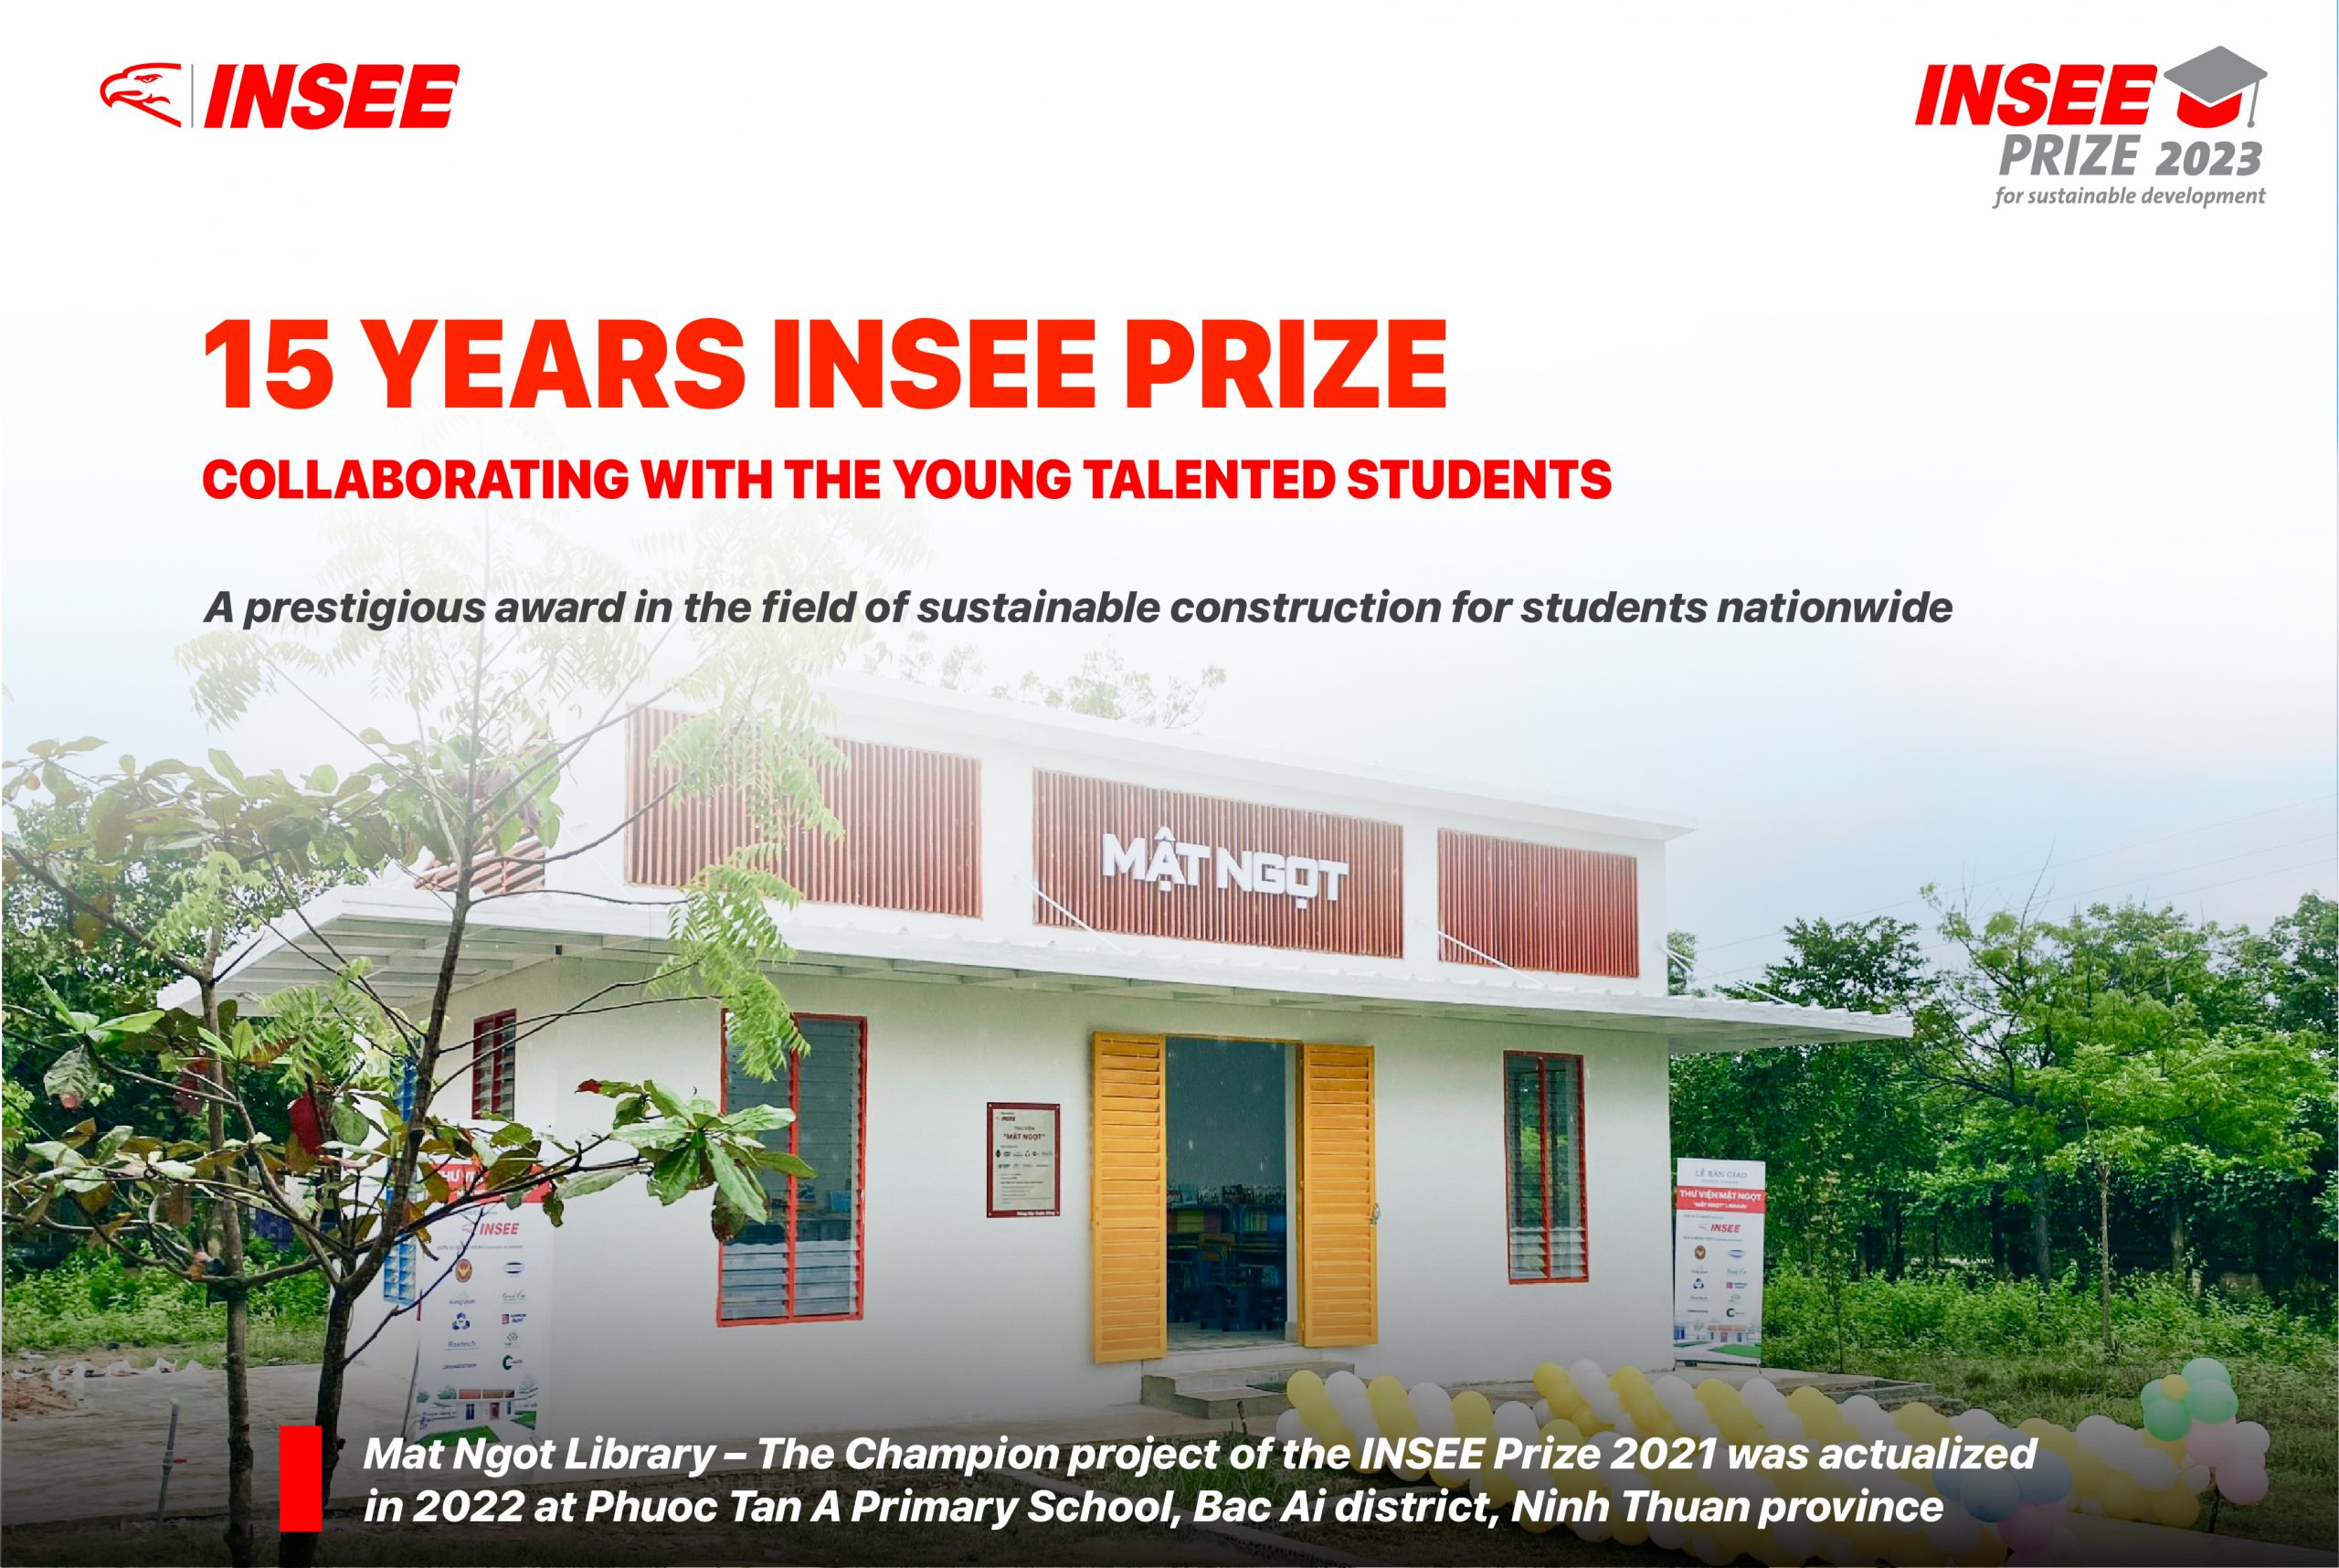 Mat Ngot Library – The Champion project of the INSEE Prize 2021 was actualized in 2022 at Phuoc Tan A Primary School, Bac Ai district, Ninh Thuan province.